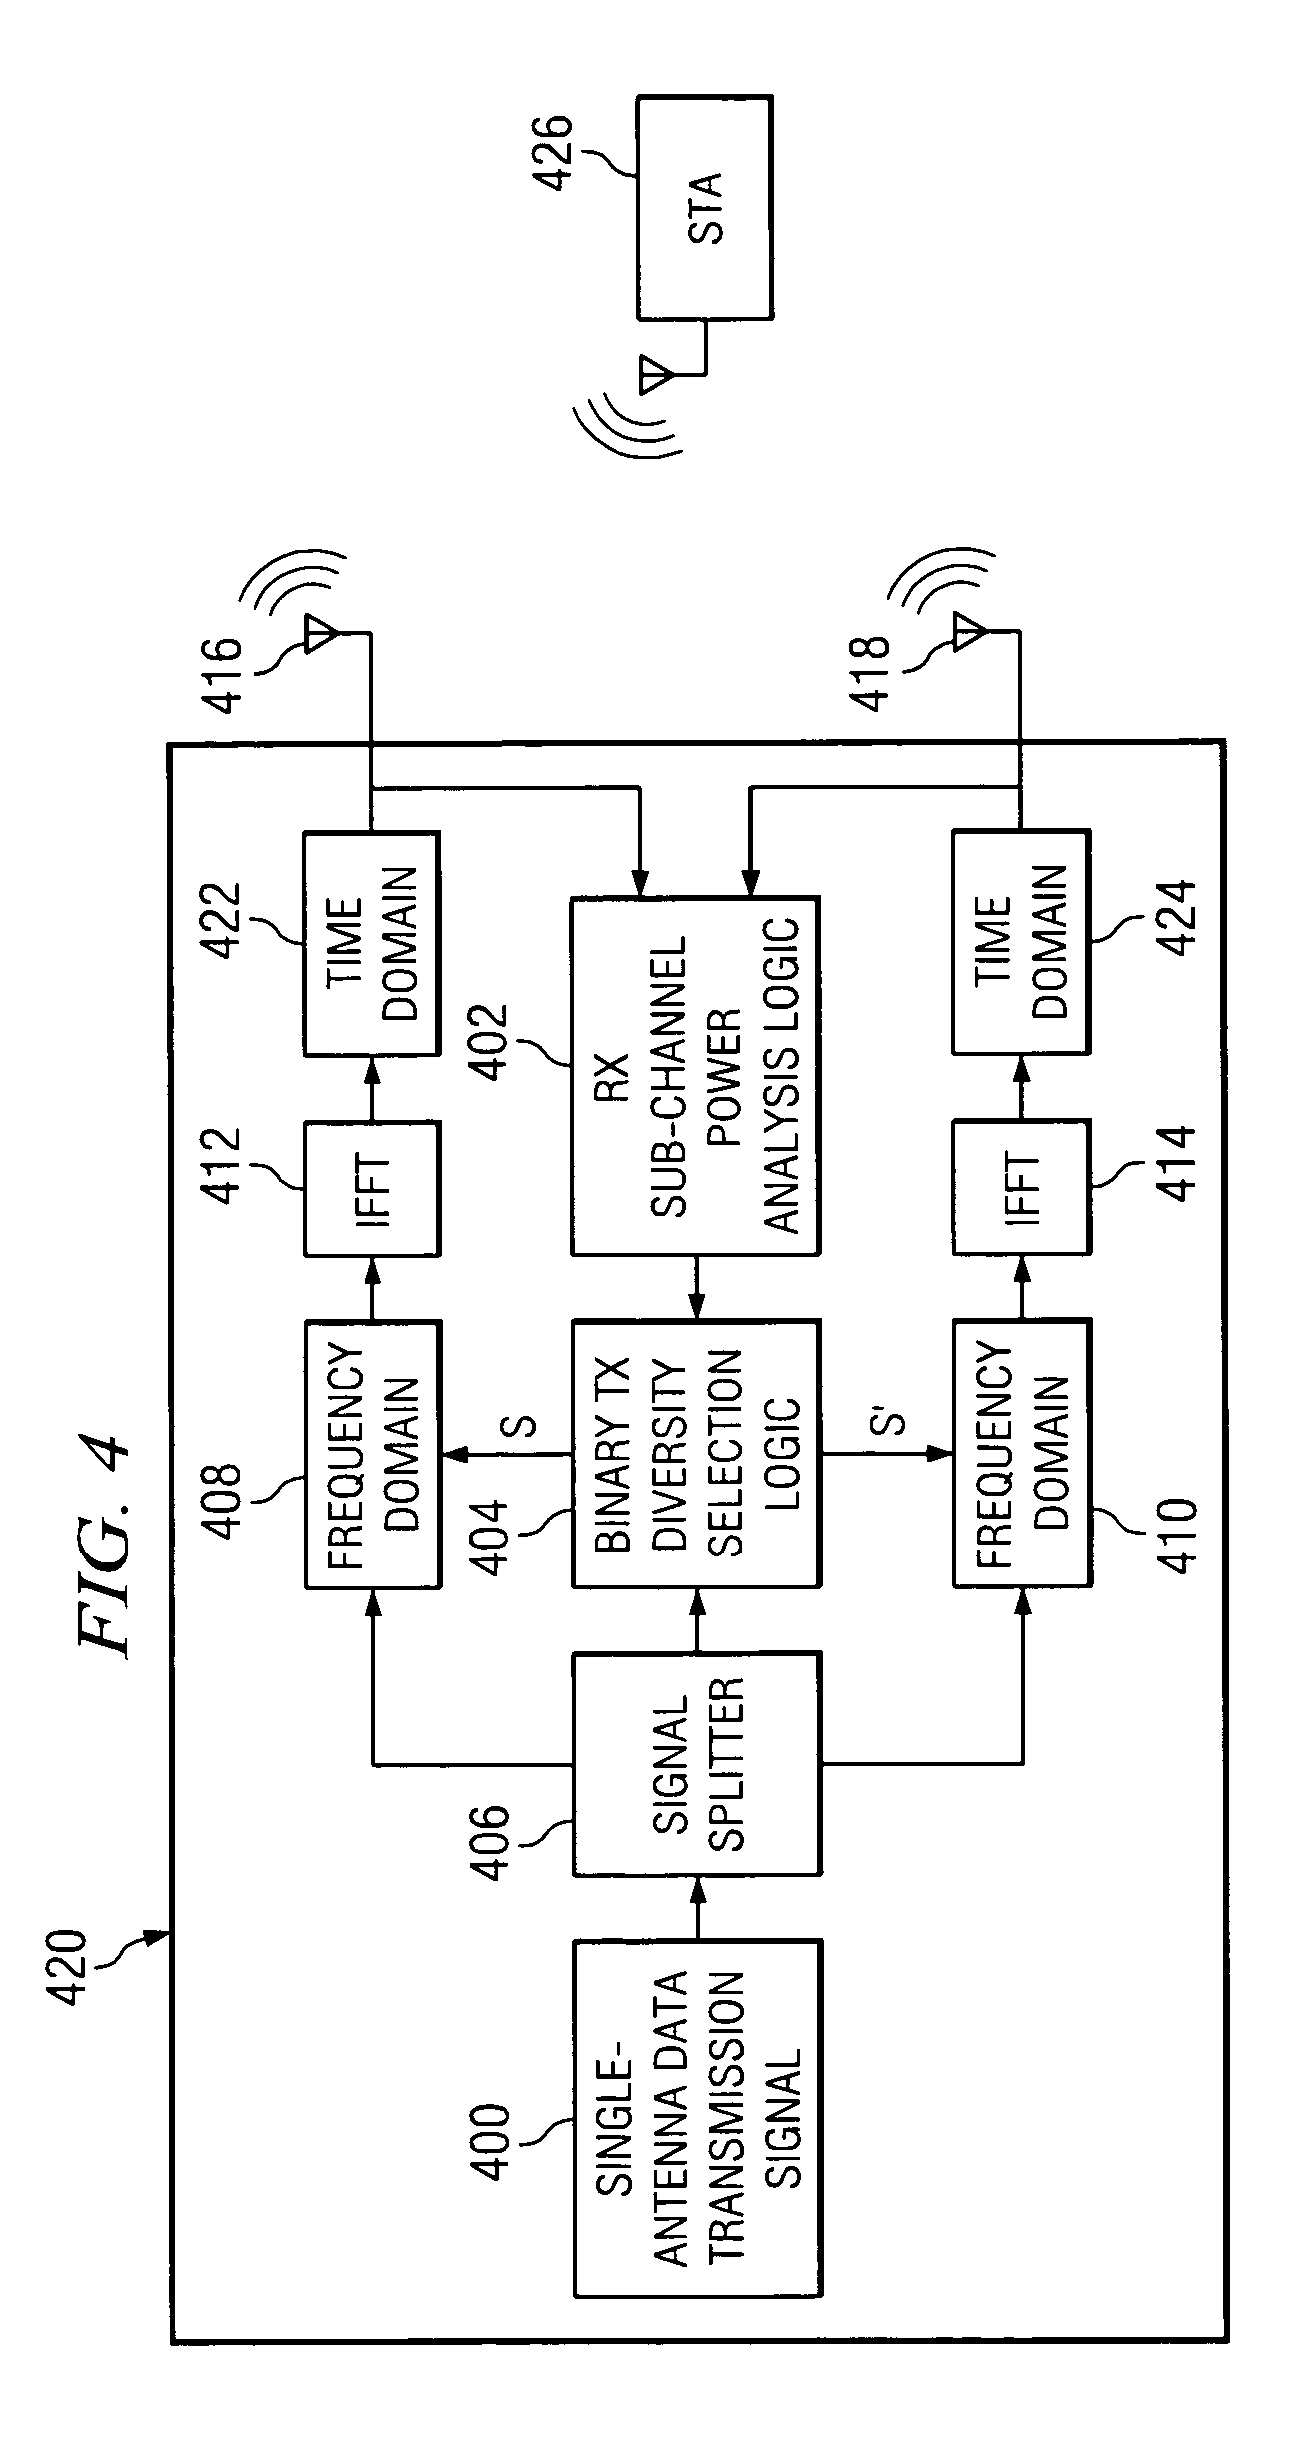 Frequency-domain subchannel transmit antenna selection and power pouring for multi-antenna transmission